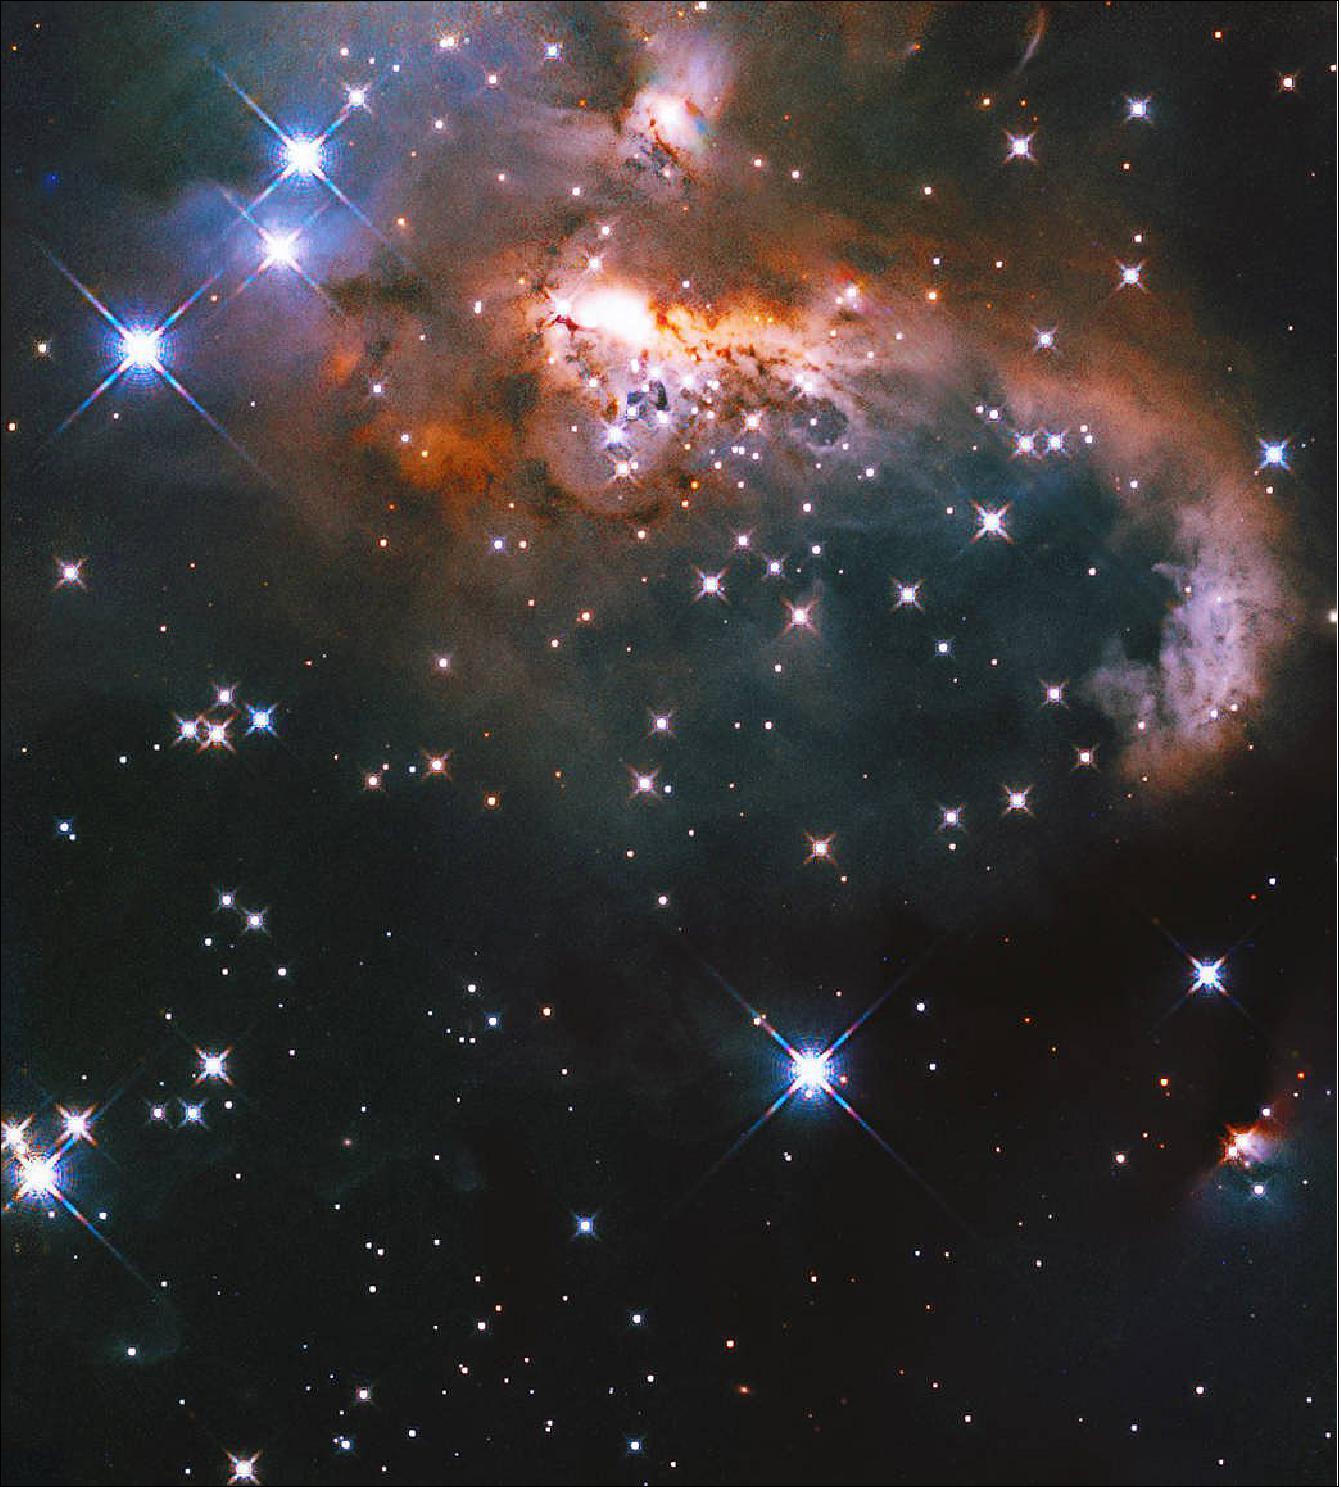 Figure 26: Hubble surveys a snowman sculpted from gas and dust [image credit: NASA, ESA, and J. Tan (Chalmers University of Technology); Processing; Gladys Kober (NASA/Catholic University of America)]